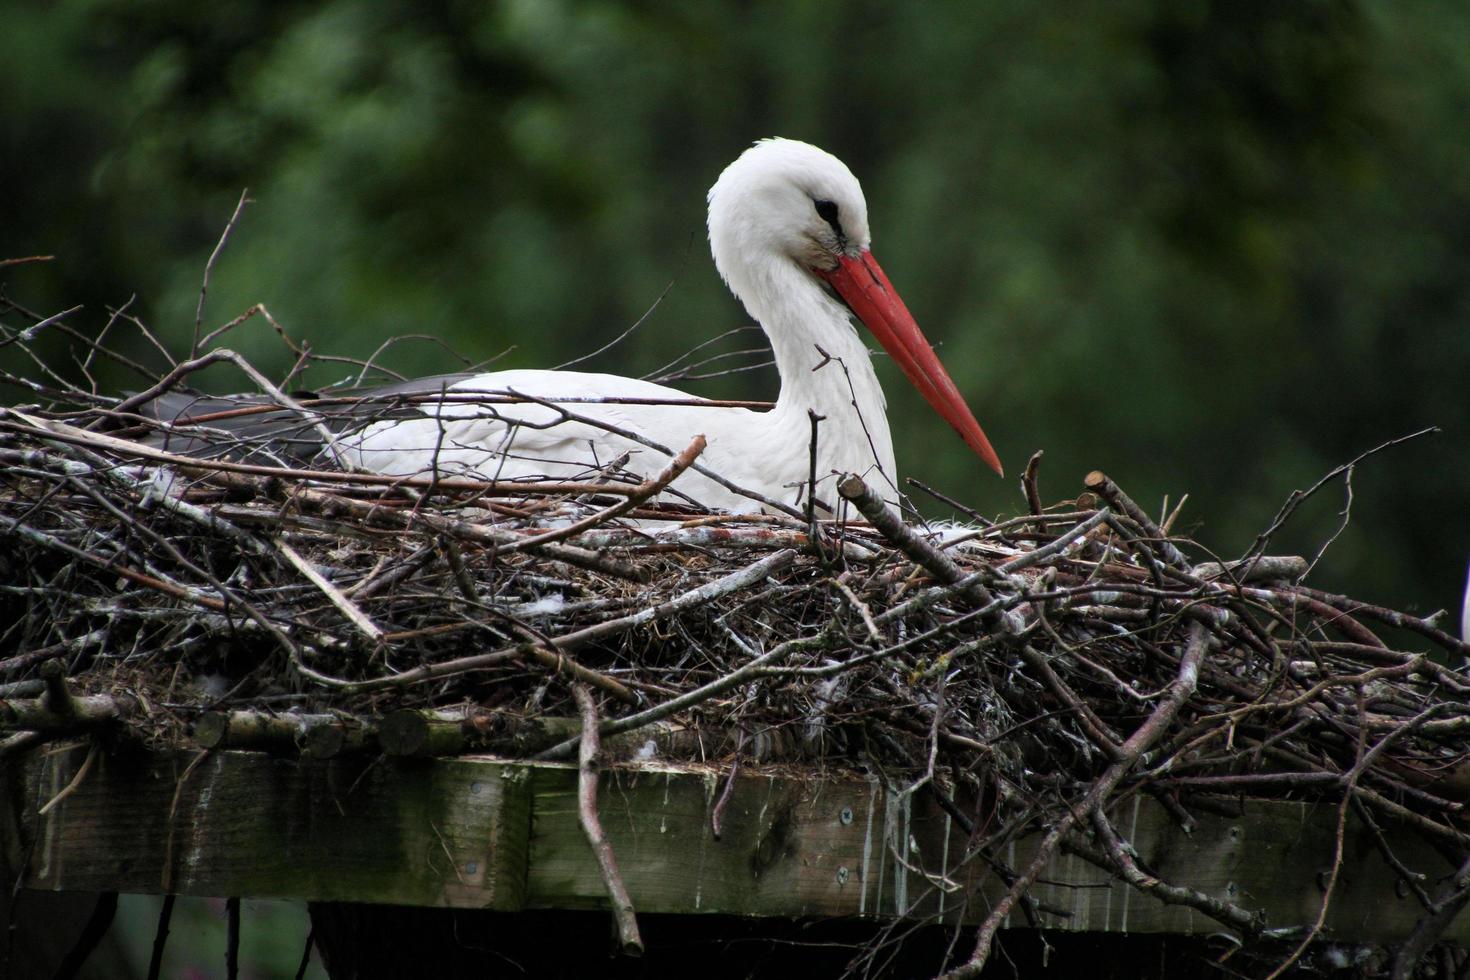 A close up of a White Stork photo